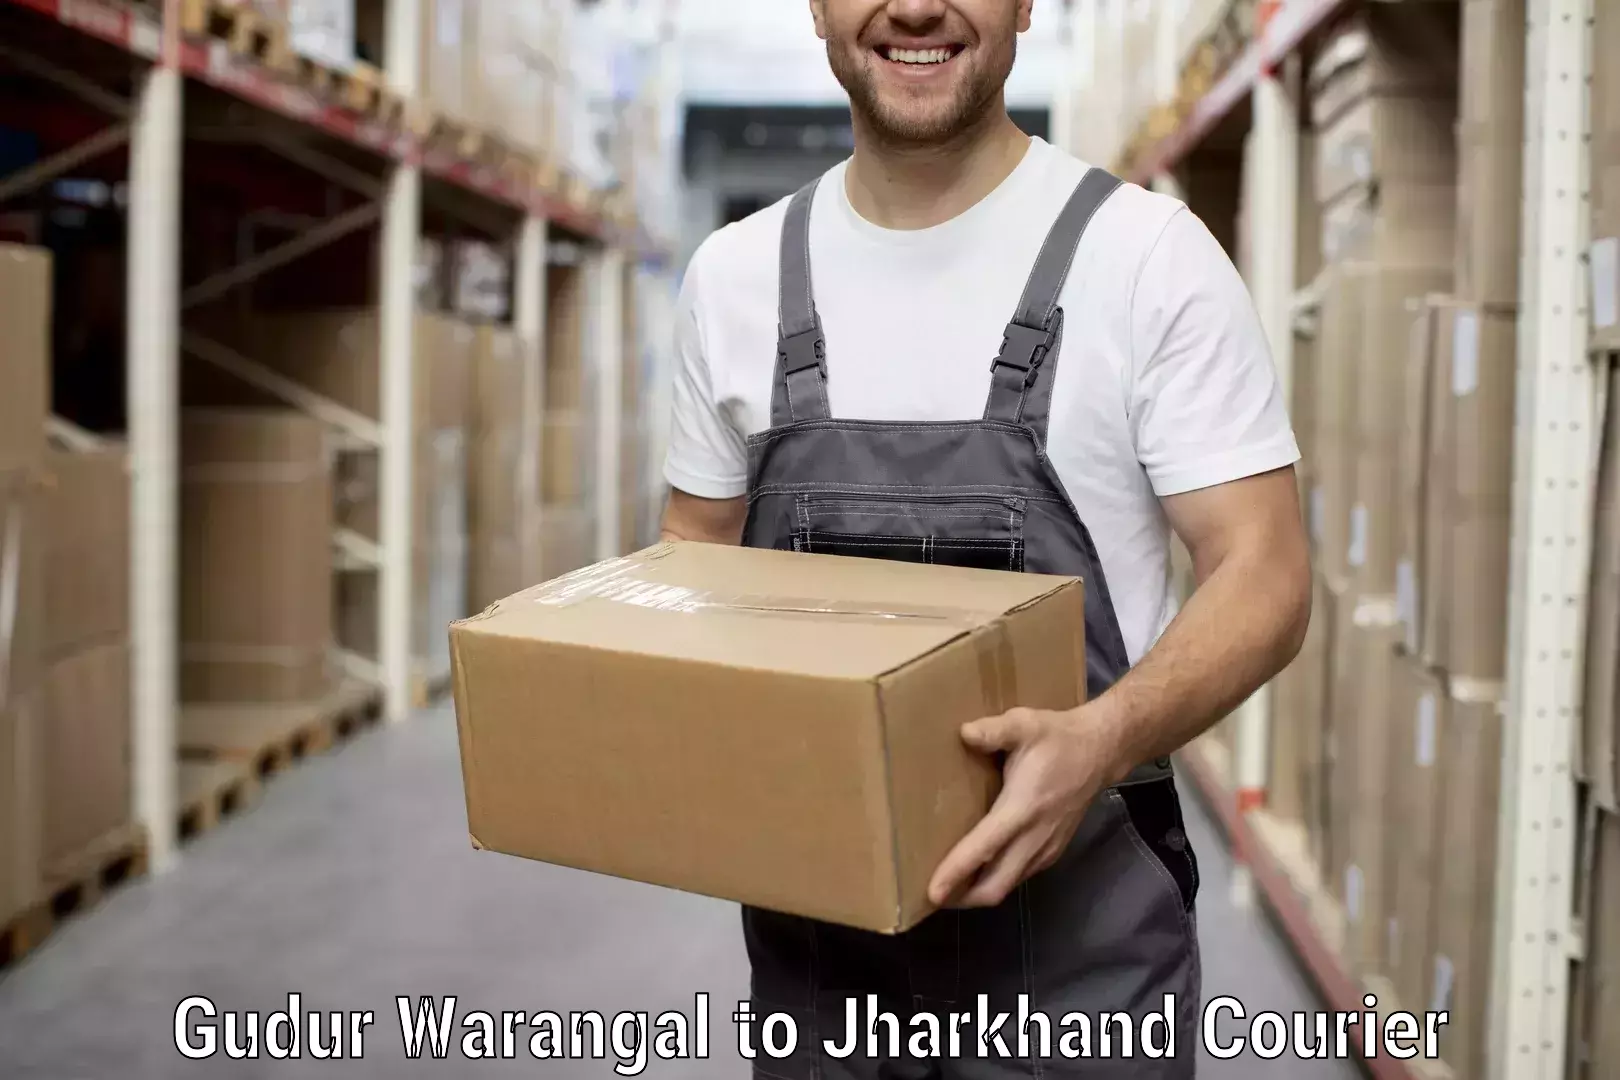 Quality relocation services in Gudur Warangal to Koderma